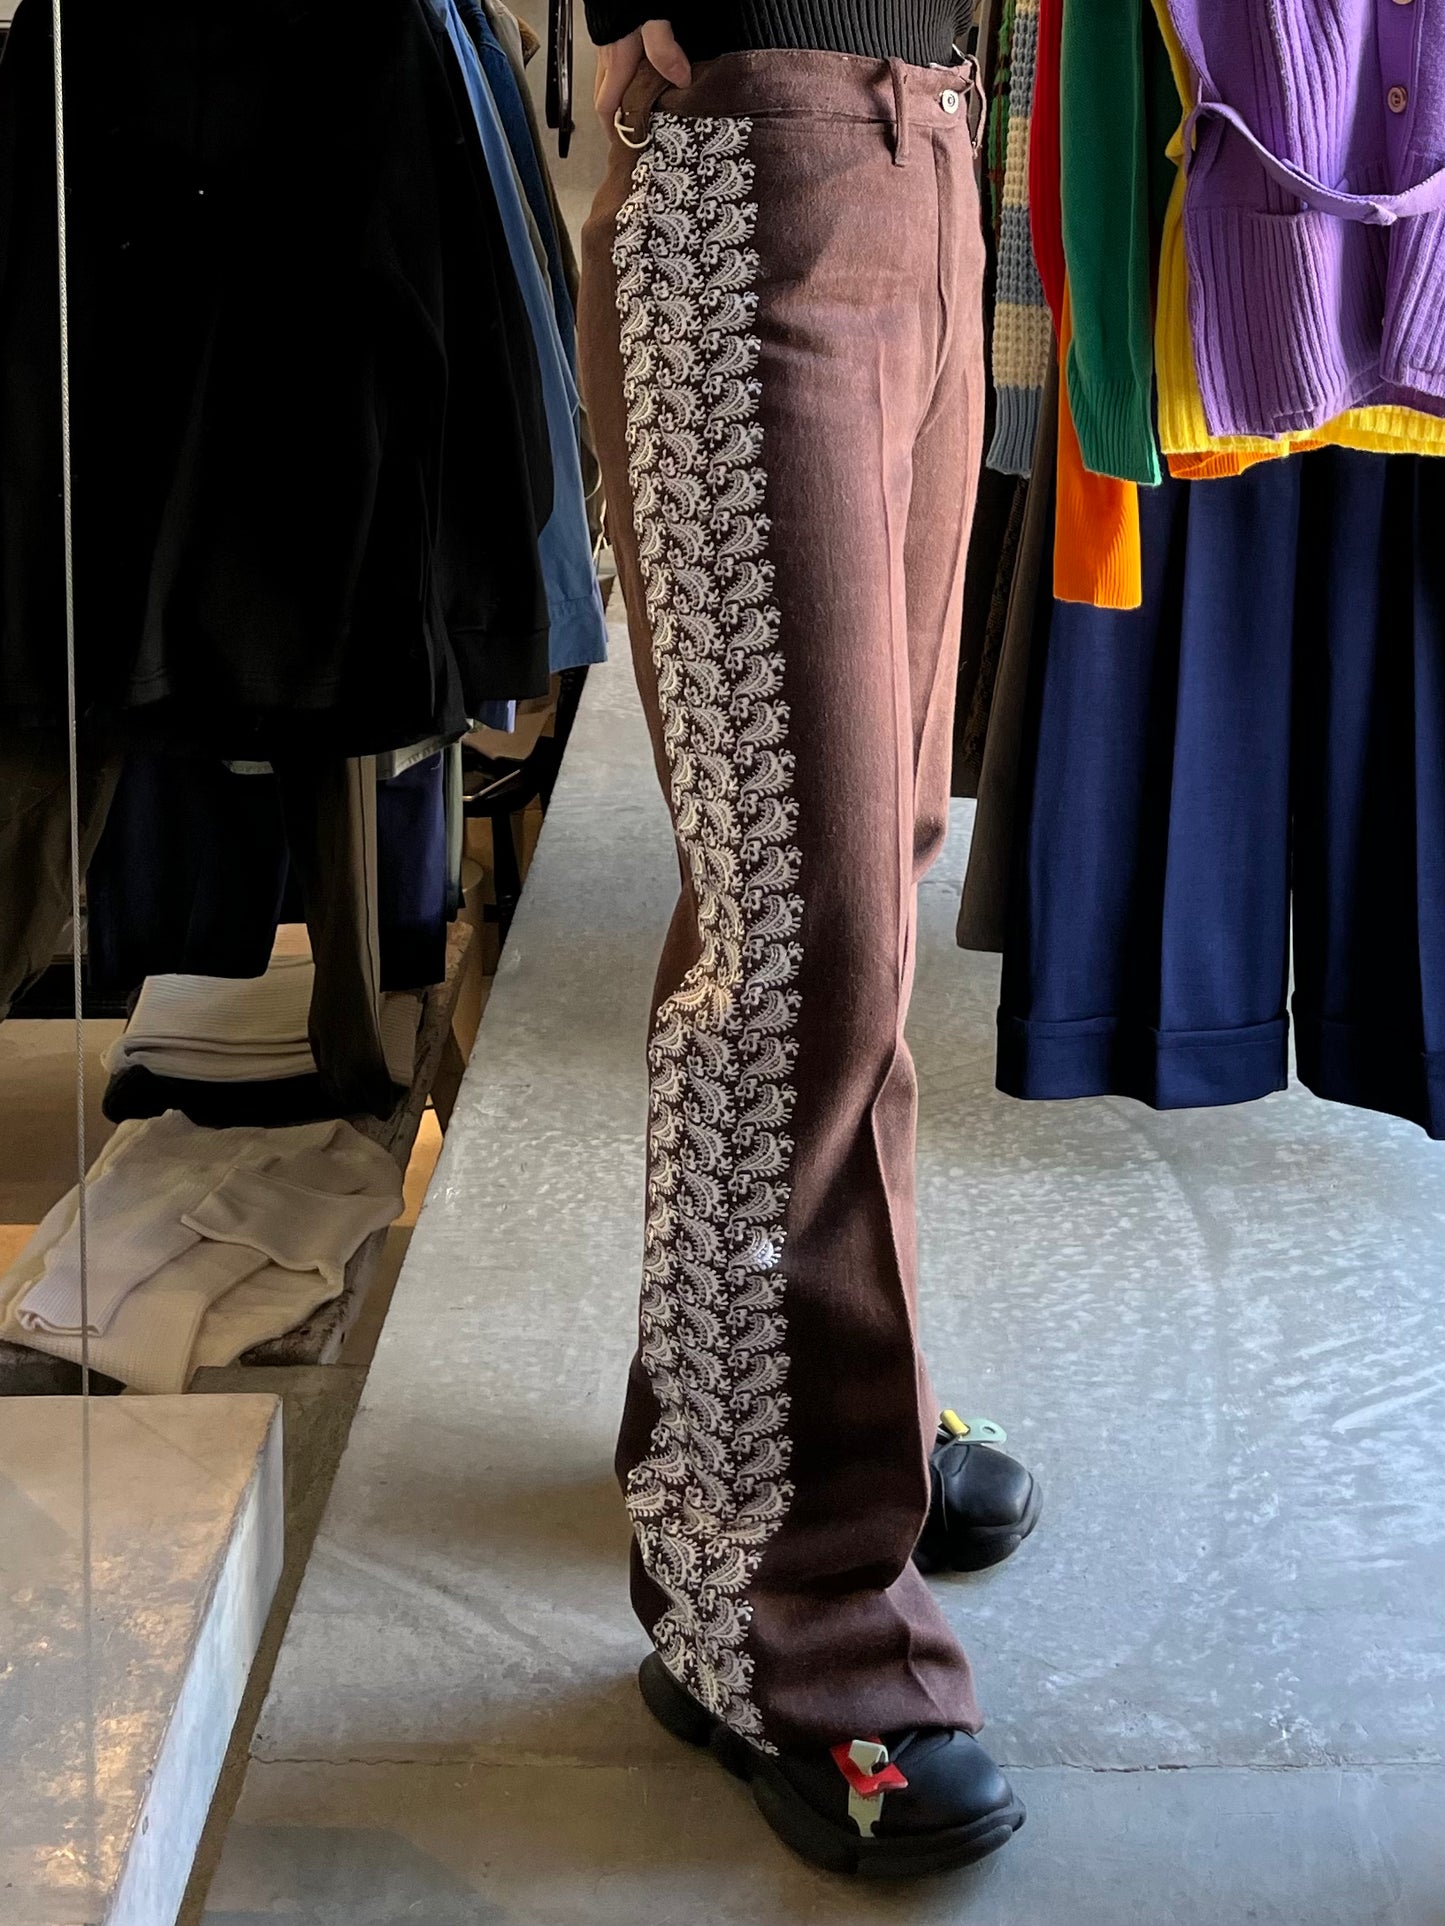 Embroidered Brown Pants